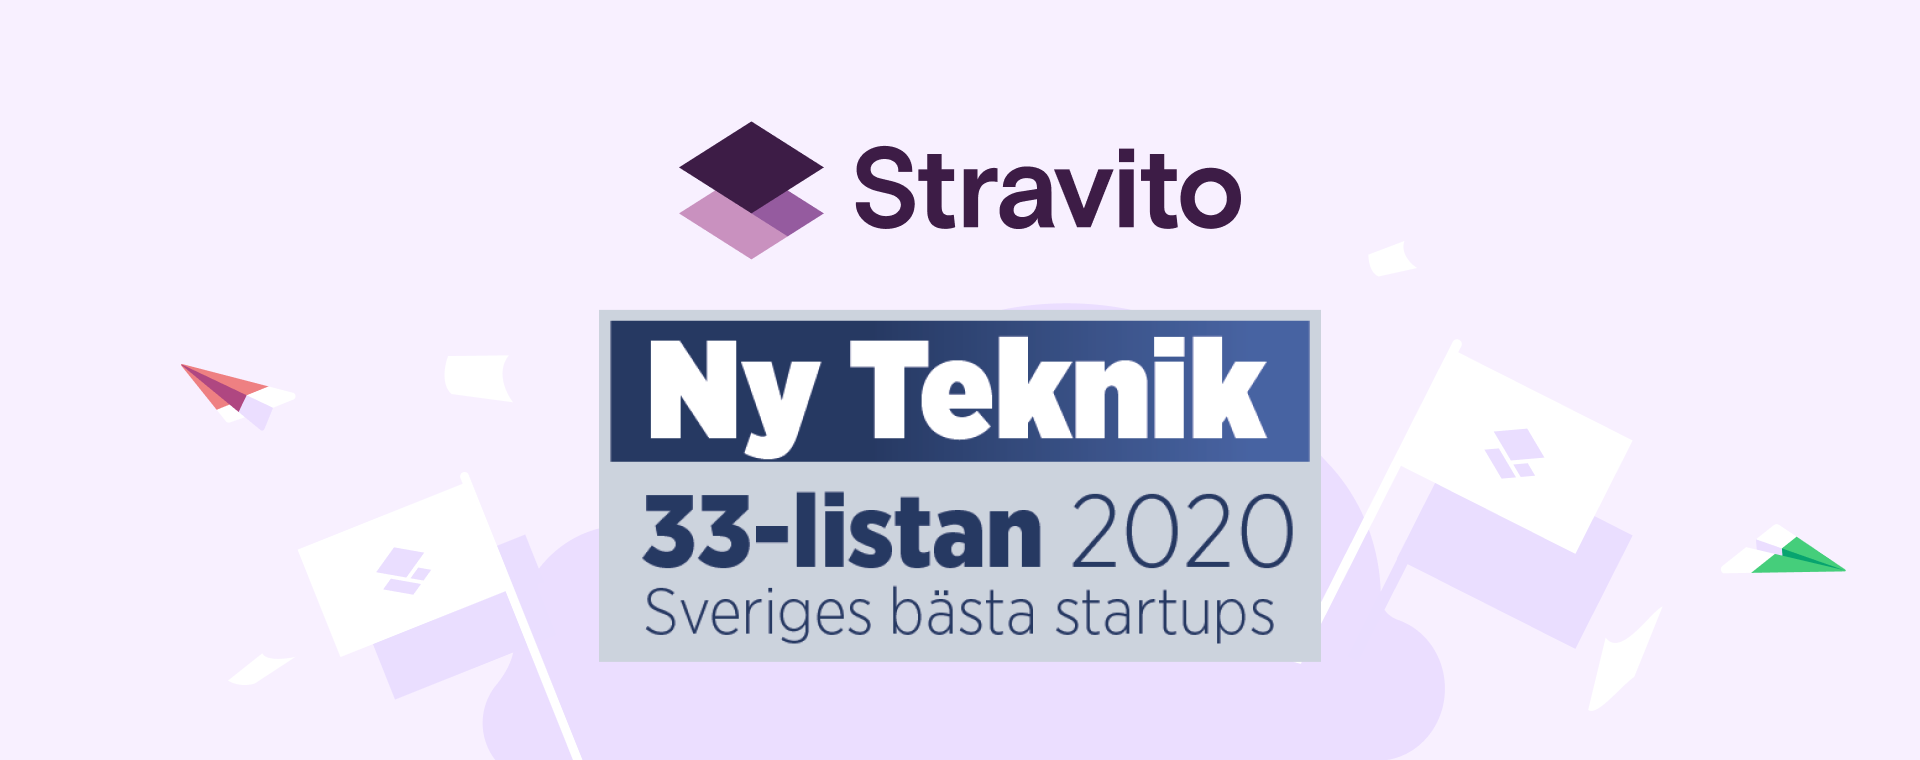 Stravito named a top startup in 2021 by 33-listan